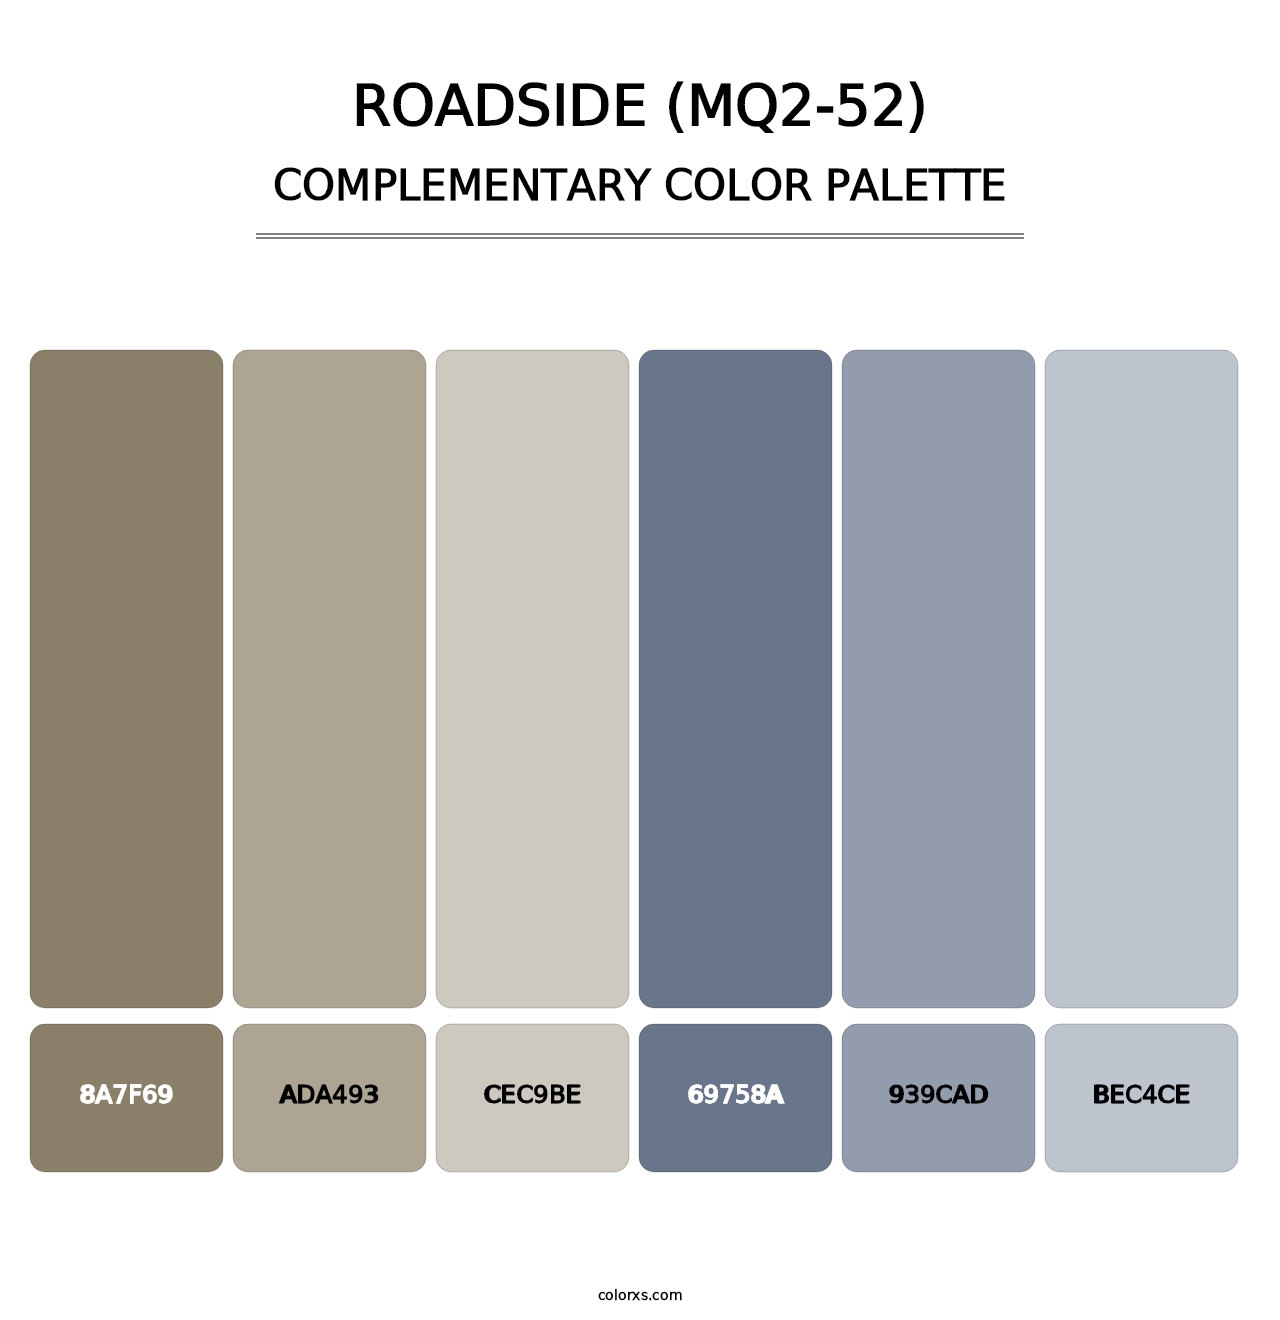 Roadside (MQ2-52) - Complementary Color Palette